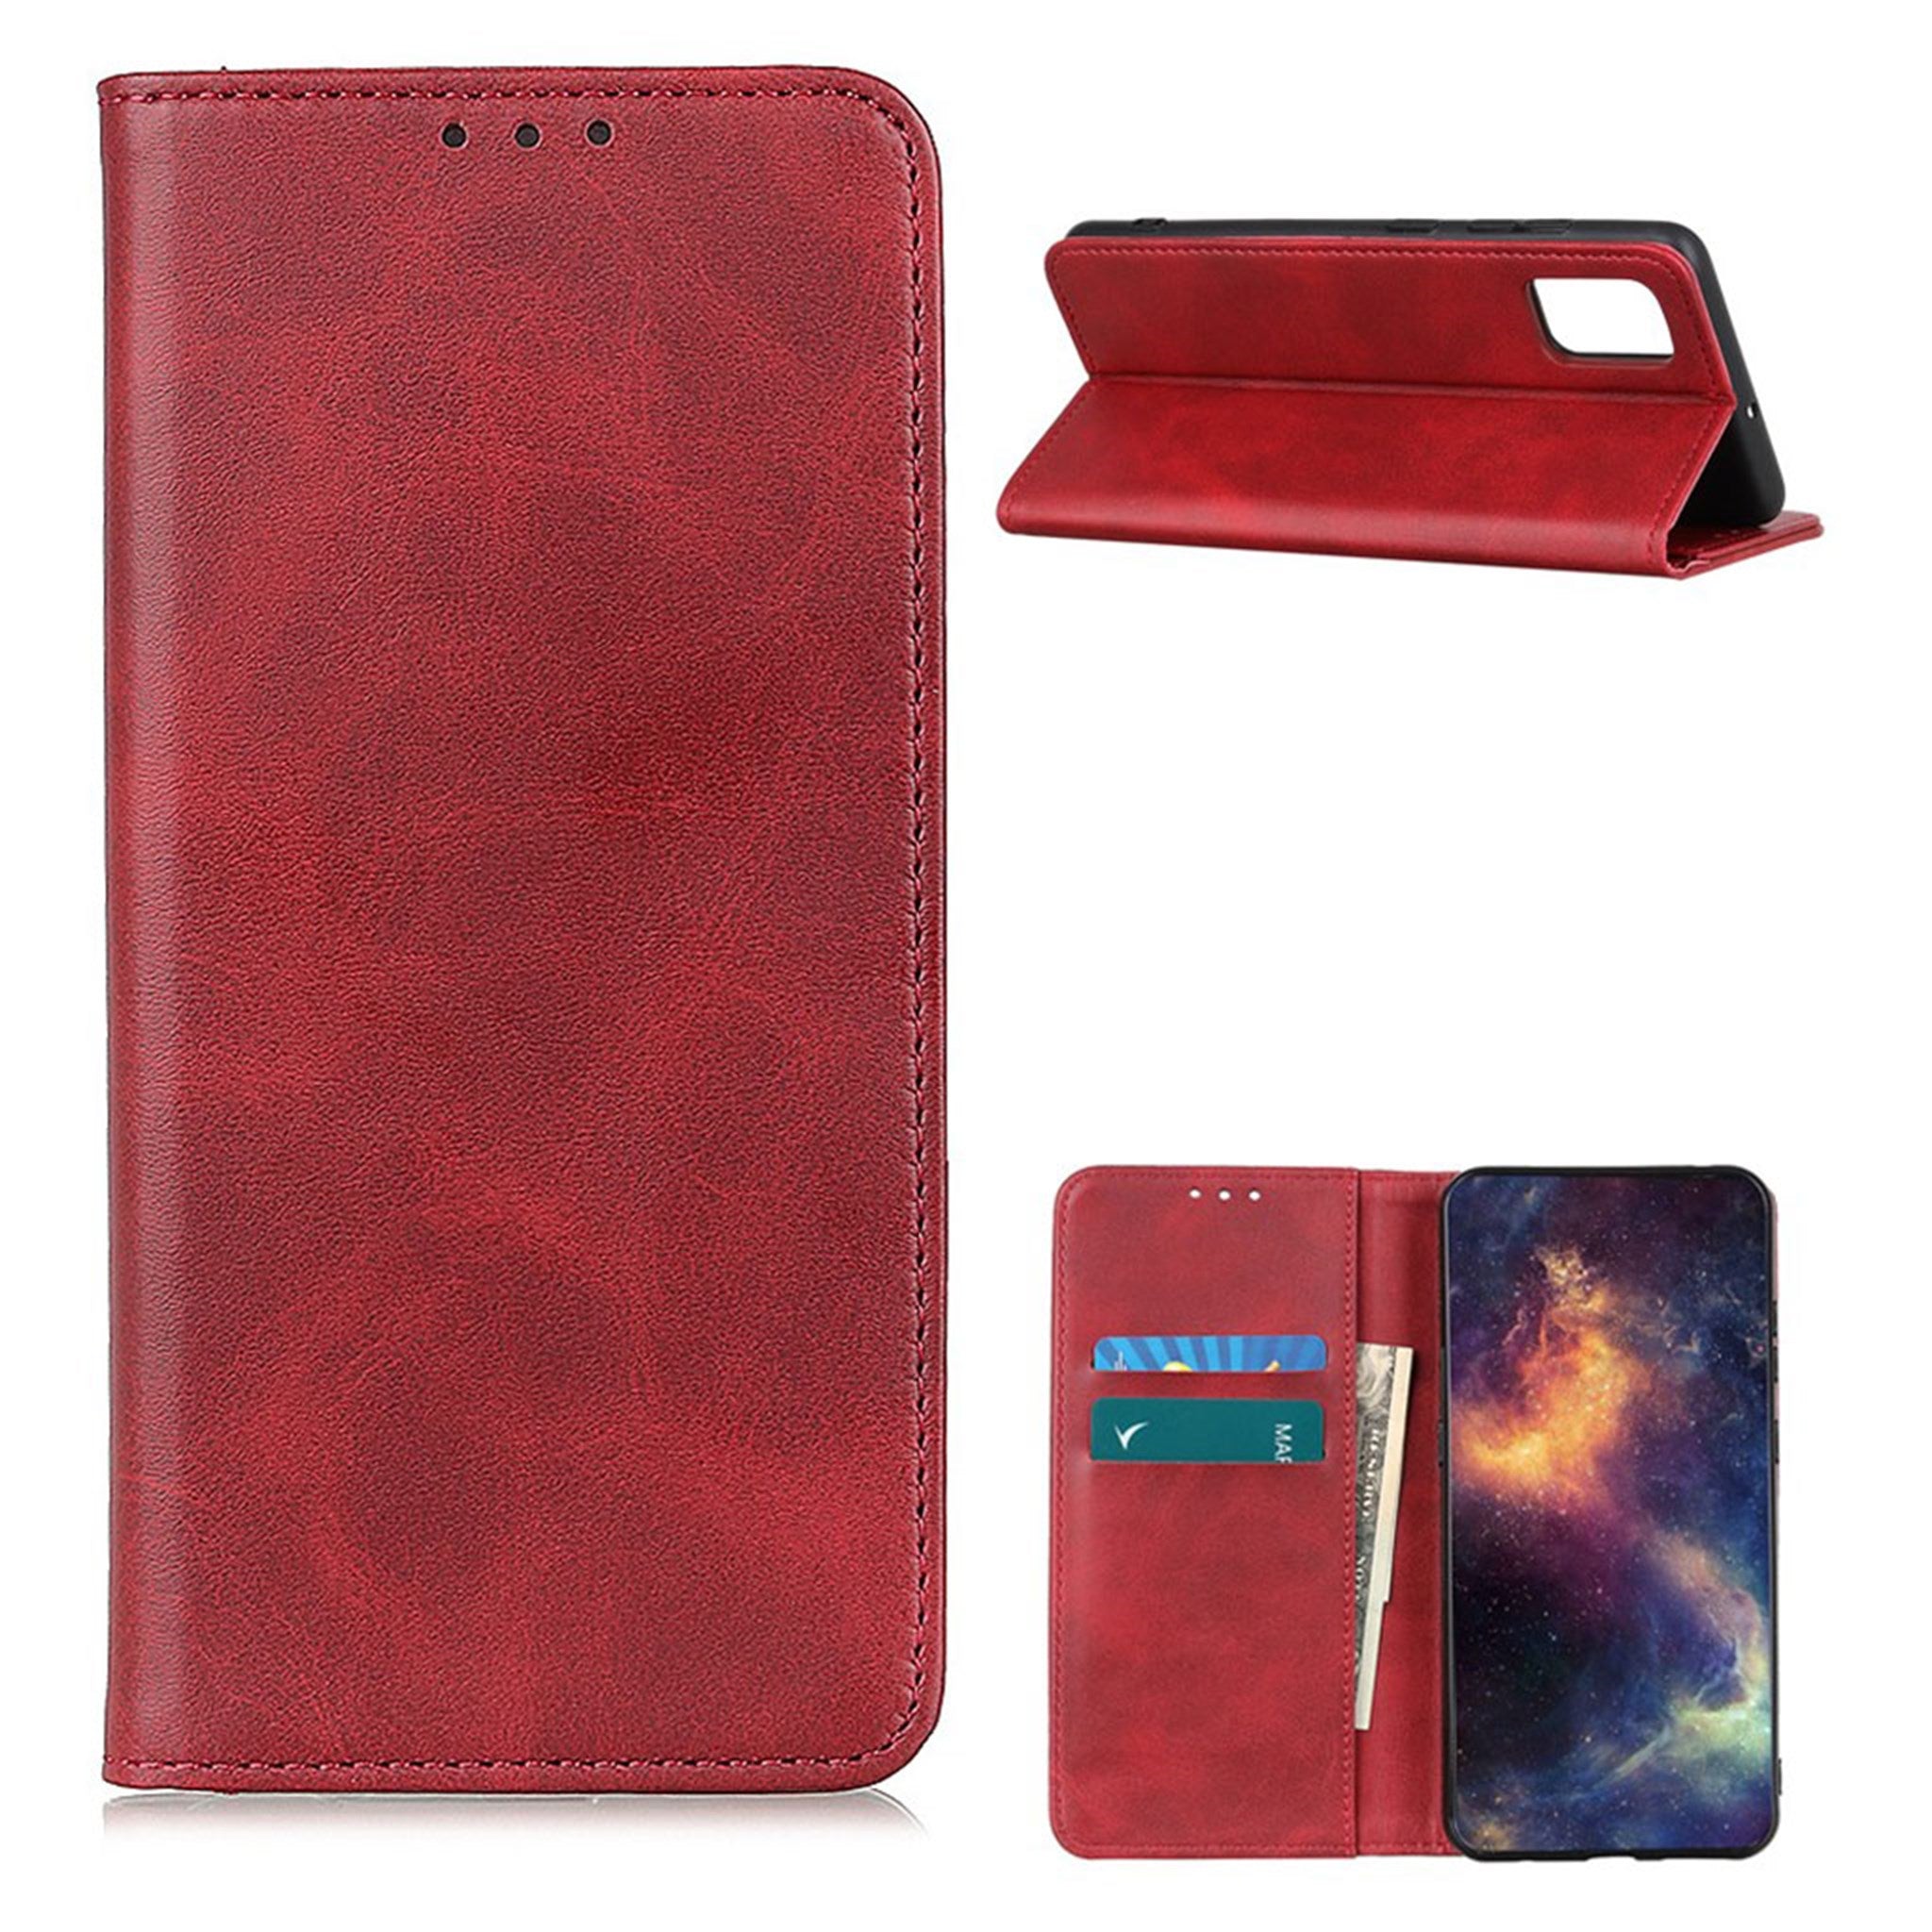 Wallet-style genuine leather flipcase for OnePlus 9 Pro - Red